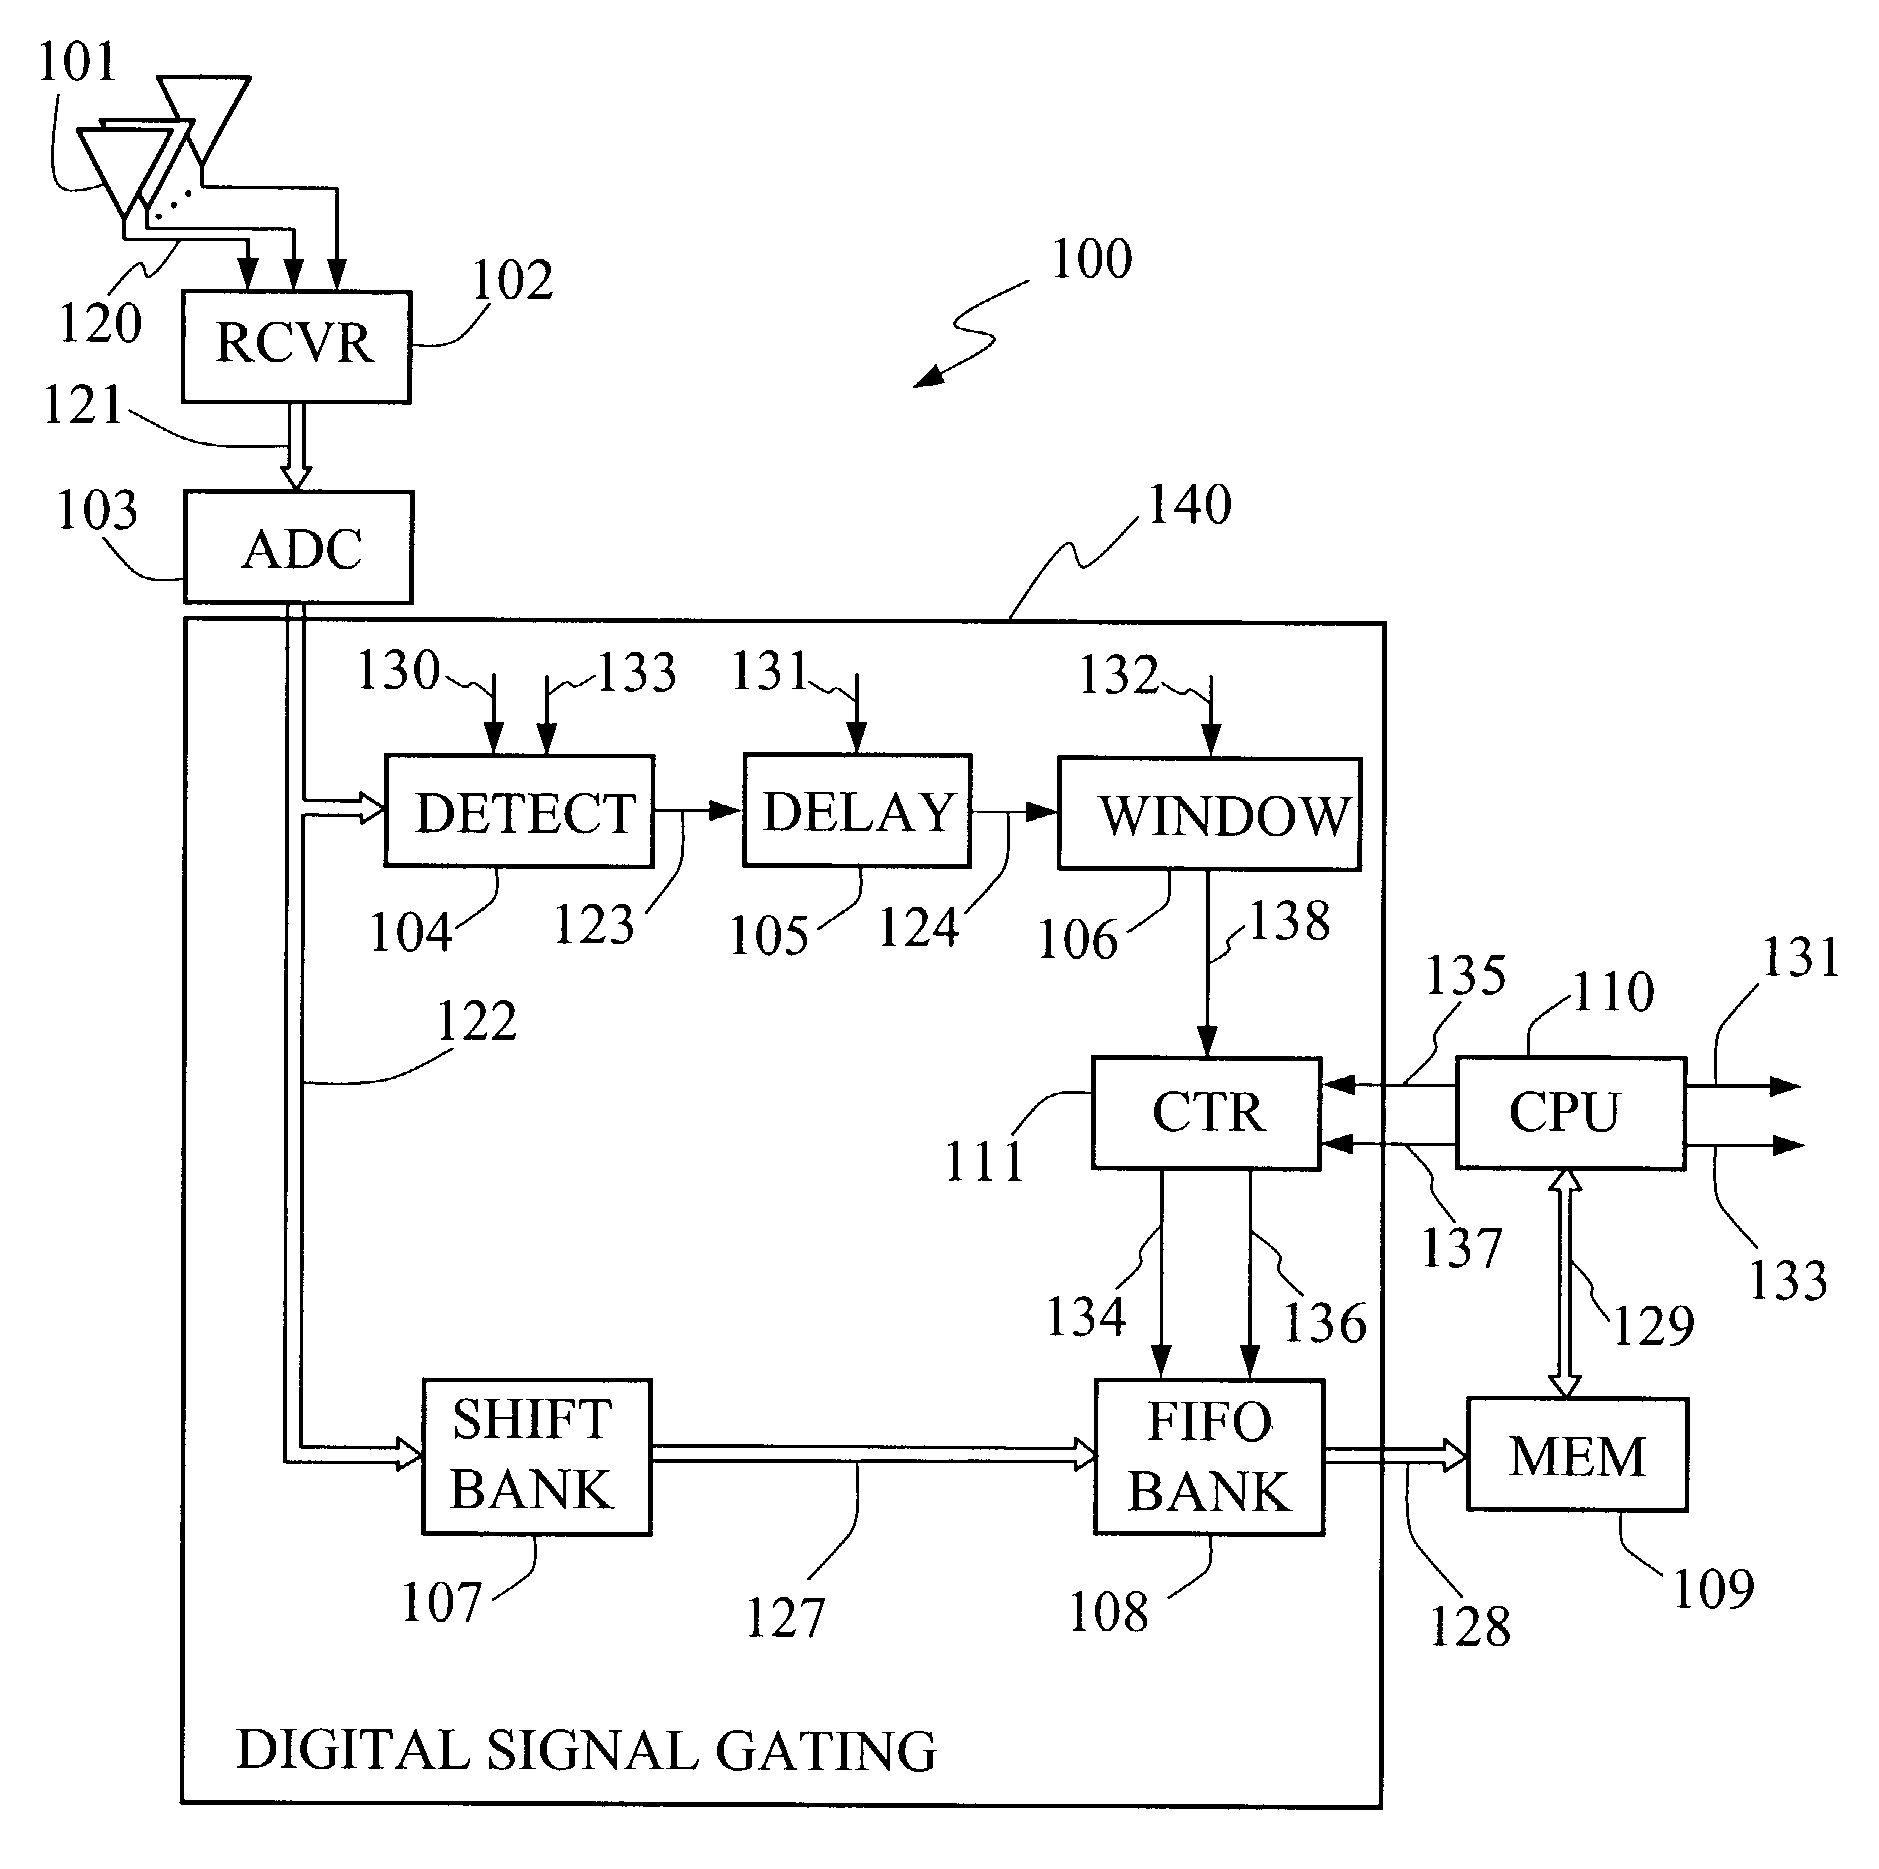 Digital signal gating apparatus and method in a pulse receiver system